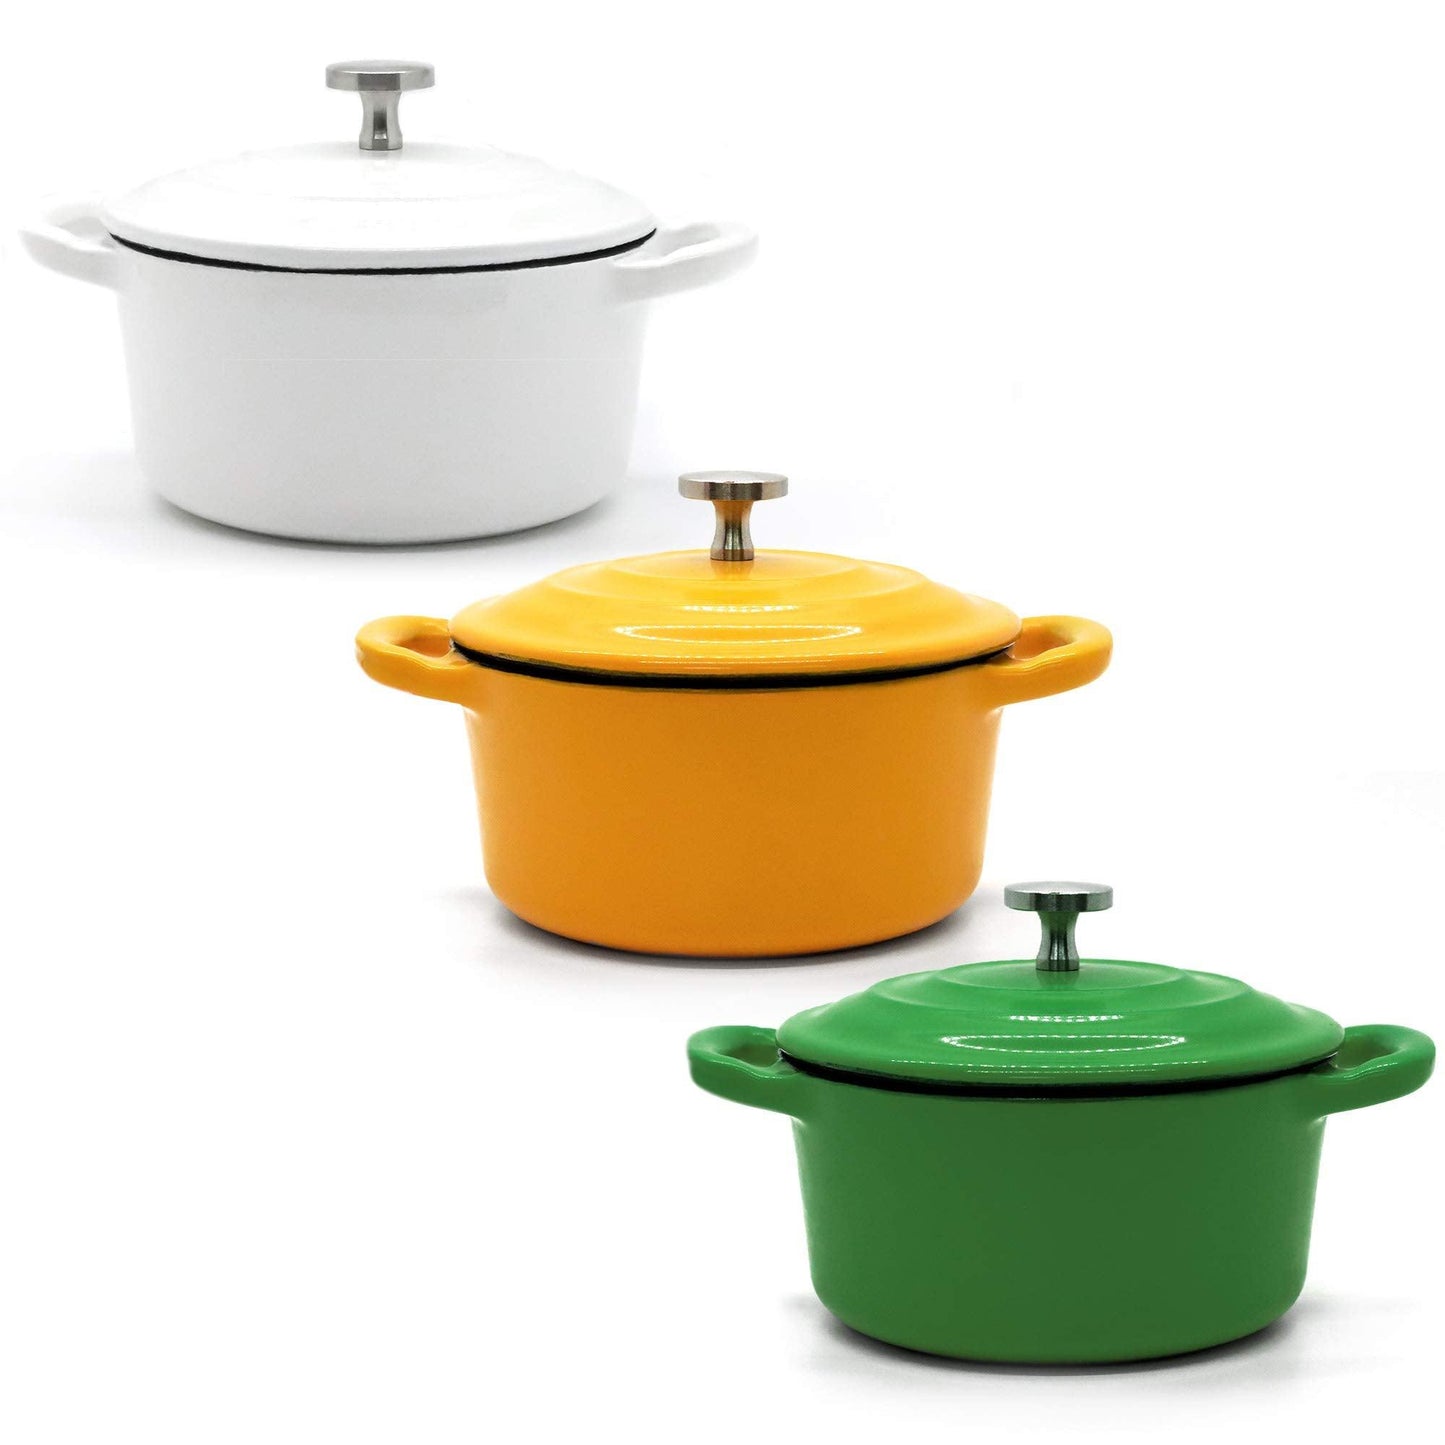 RJ Legend 8.5 oz. Mini Cocotte with Lid, Set of 3 Small Dutch Oven for Baking, Enameled Cast Iron Ramekin, 0.25 Quart, Green/White/Yellow, 3 Piece - CookCave